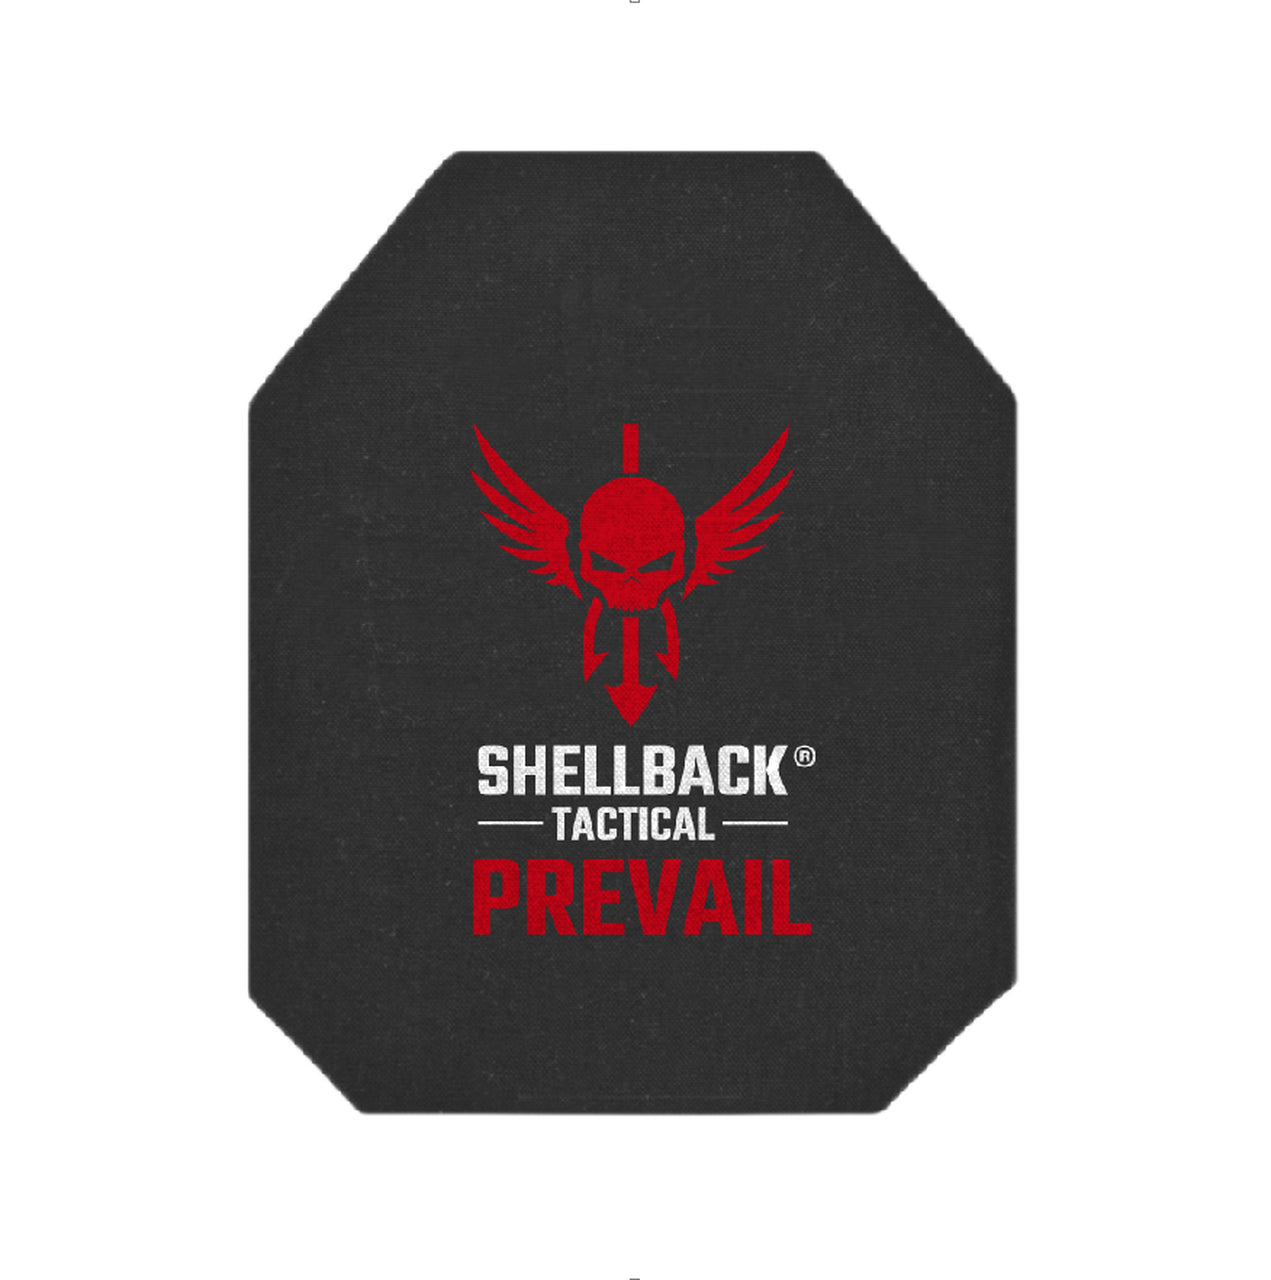 Shellback Tactical Pre-Warning Pad - Shellback Tactical Prevail Series Level IV Single Curve 10 x 12 Hard Armor Plate - Model 4S17.